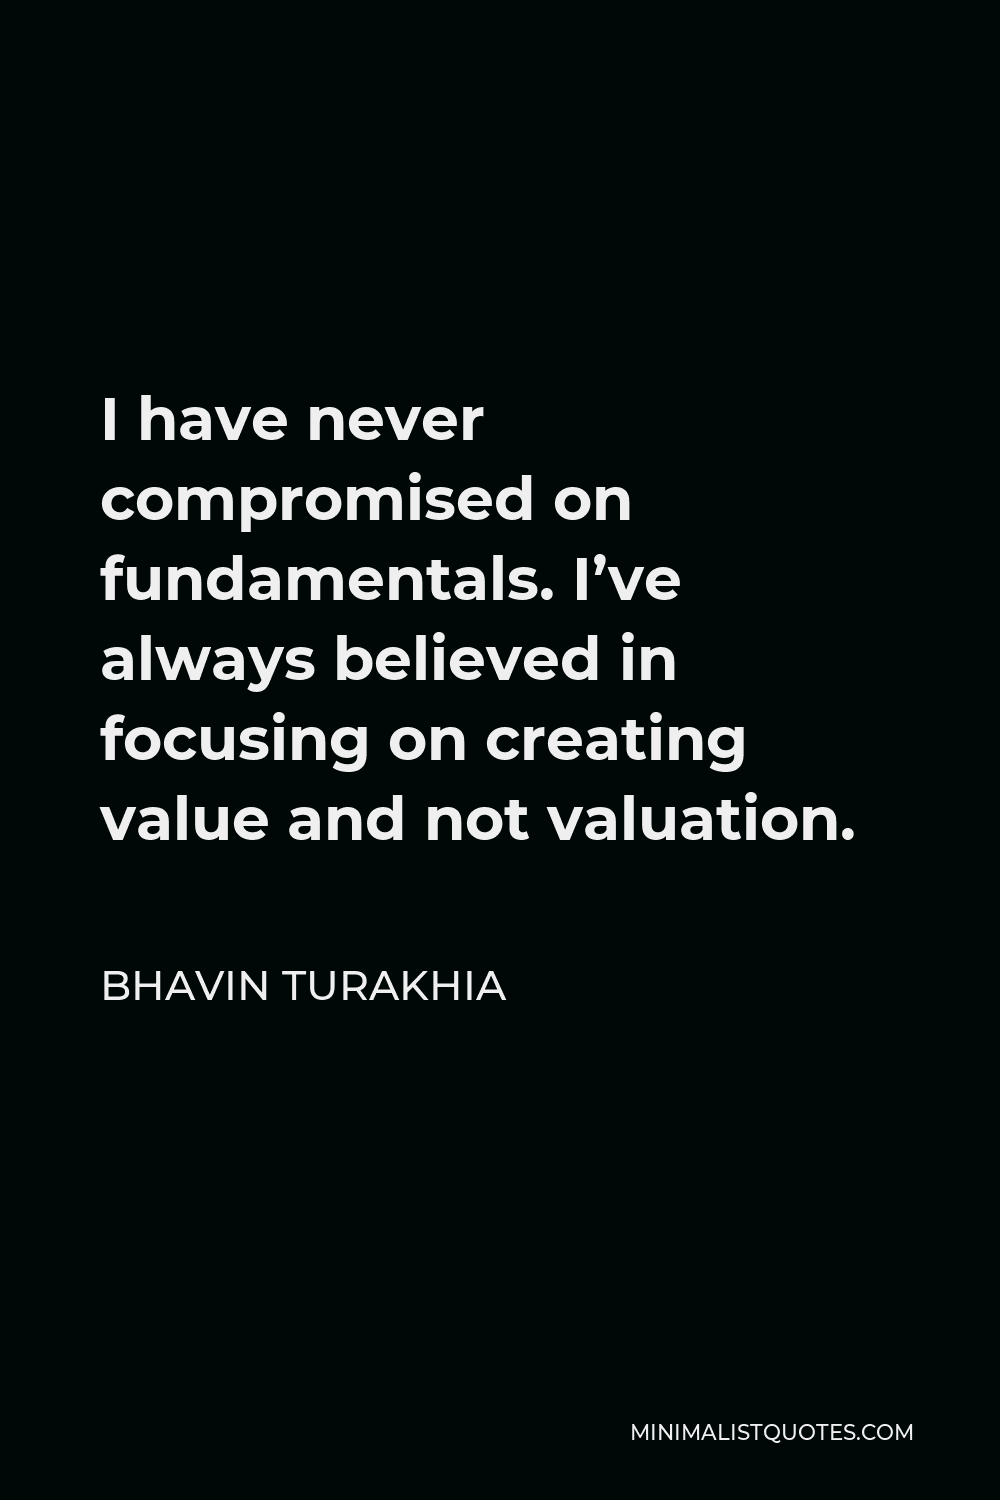 Bhavin Turakhia Quote - I have never compromised on fundamentals. I’ve always believed in focusing on creating value and not valuation.